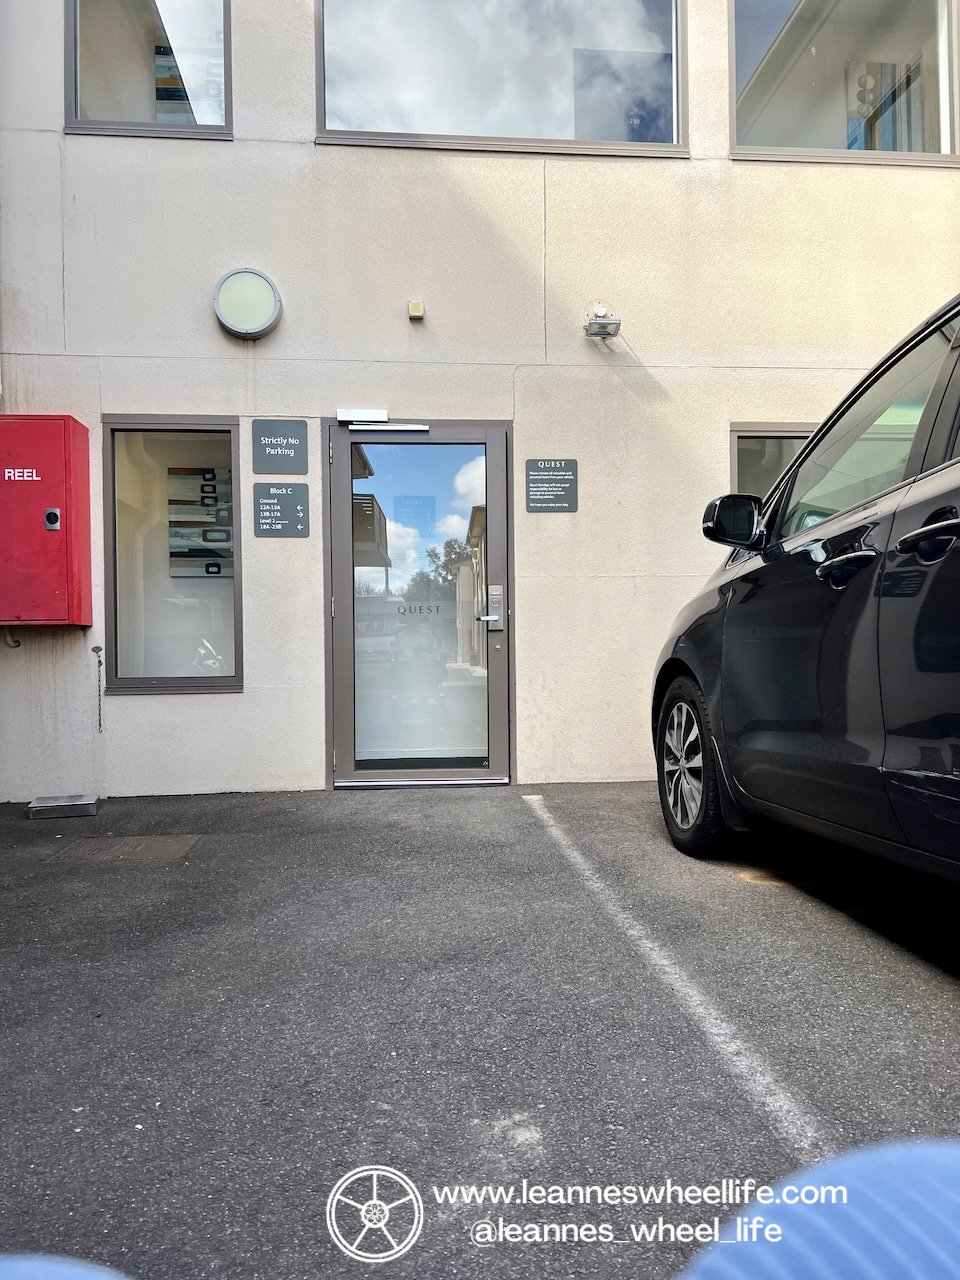 Accessible parking bay next to the main door to the accessible apartments